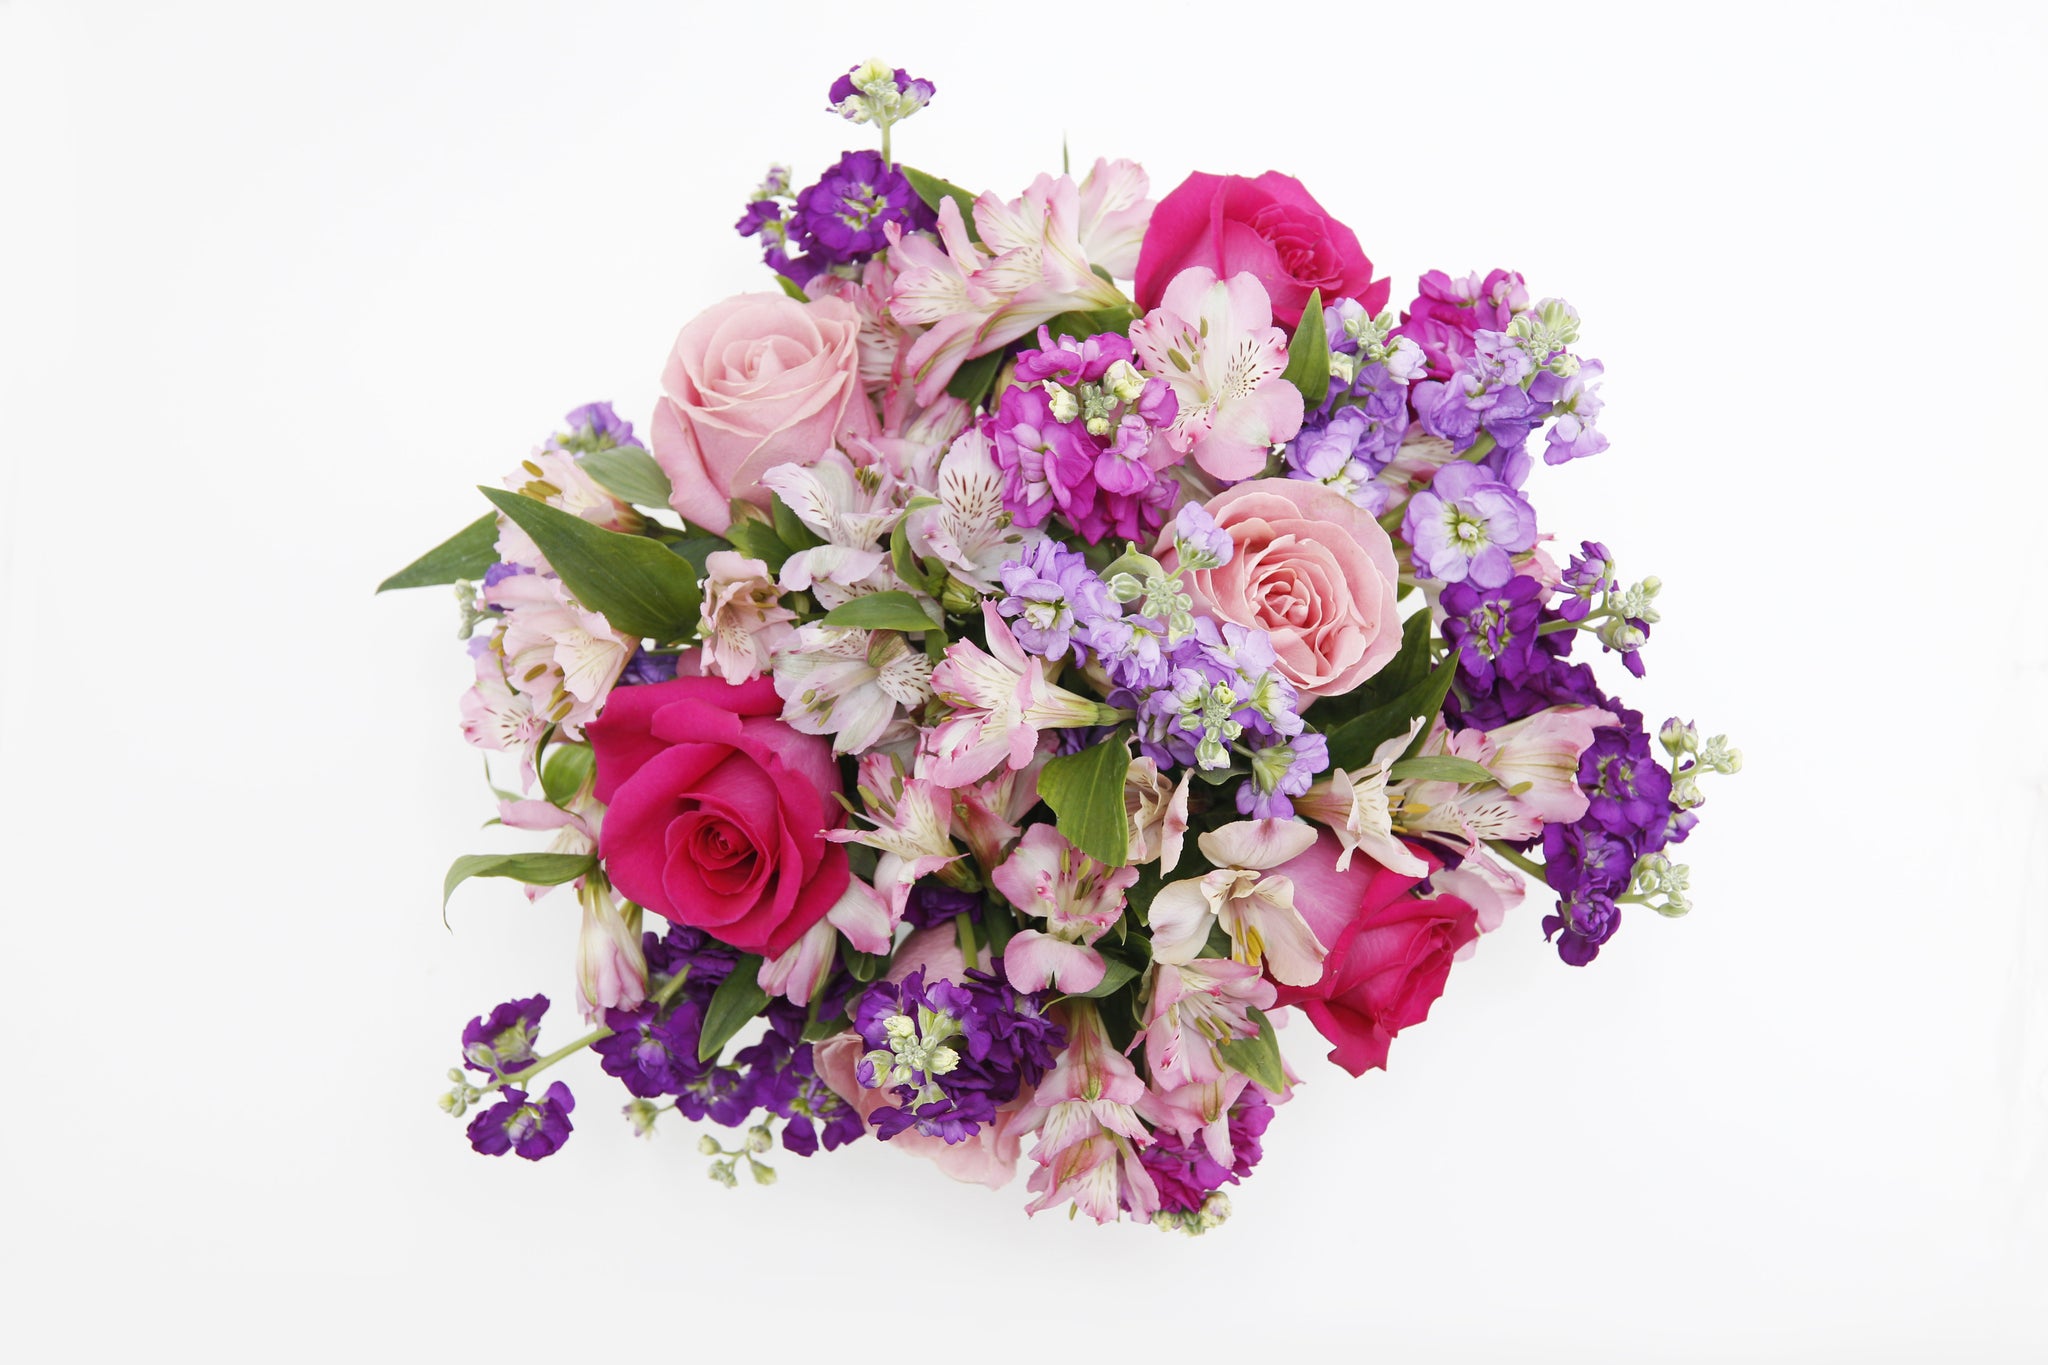 Tranquil Bouquet TOP - hot pink roses , pink roses , purple stock , lavender stock , fuchsia stock , pink lilies , Top of bouquet